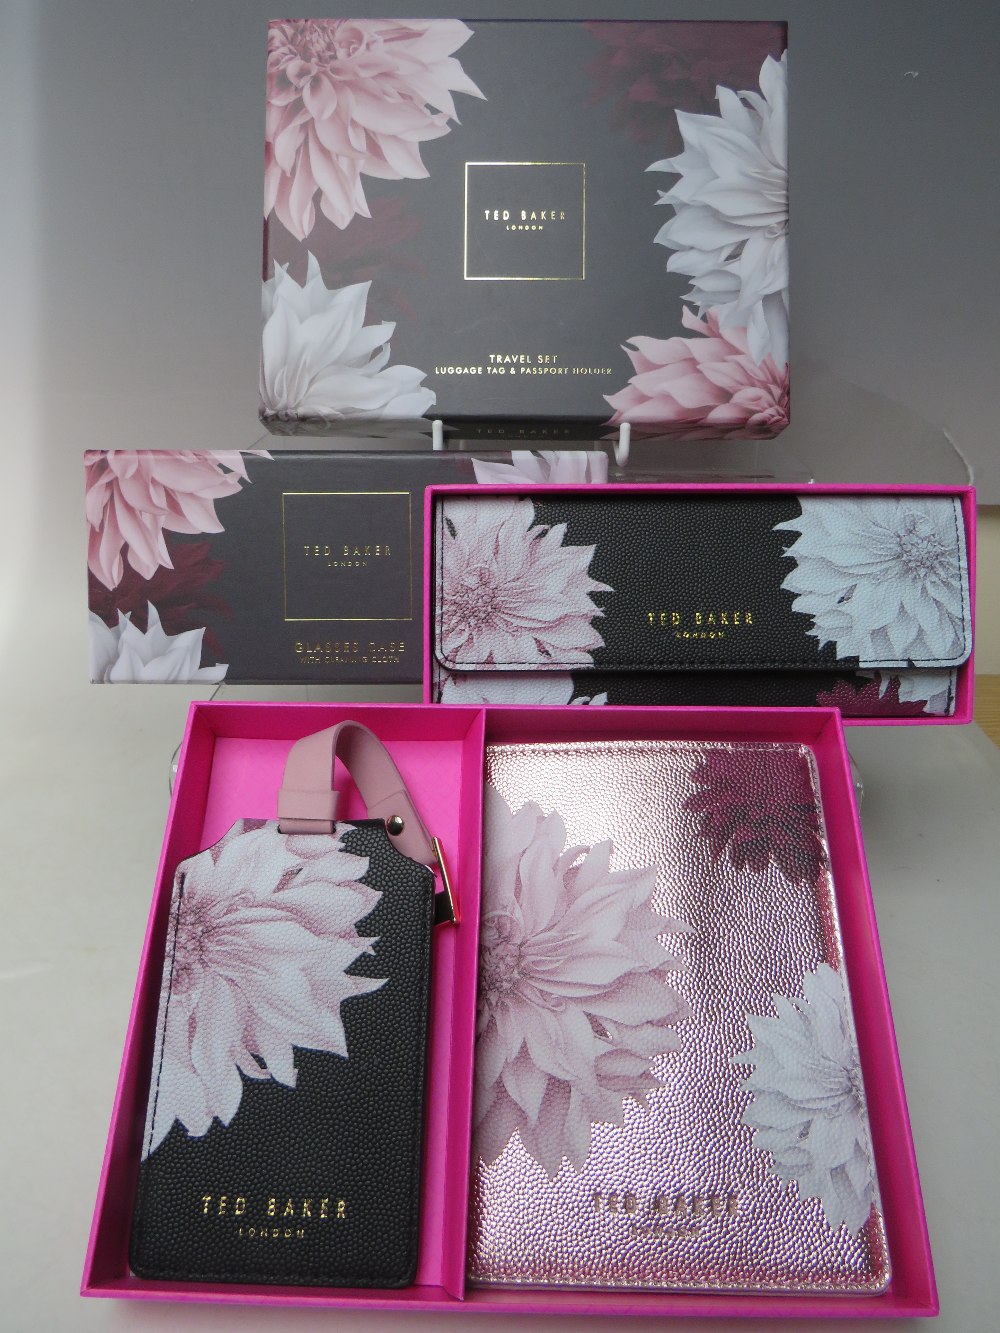 A NEW AND BOXED TED BAKER TRAVEL SET, comprising a luggage tag and passport holder, together with